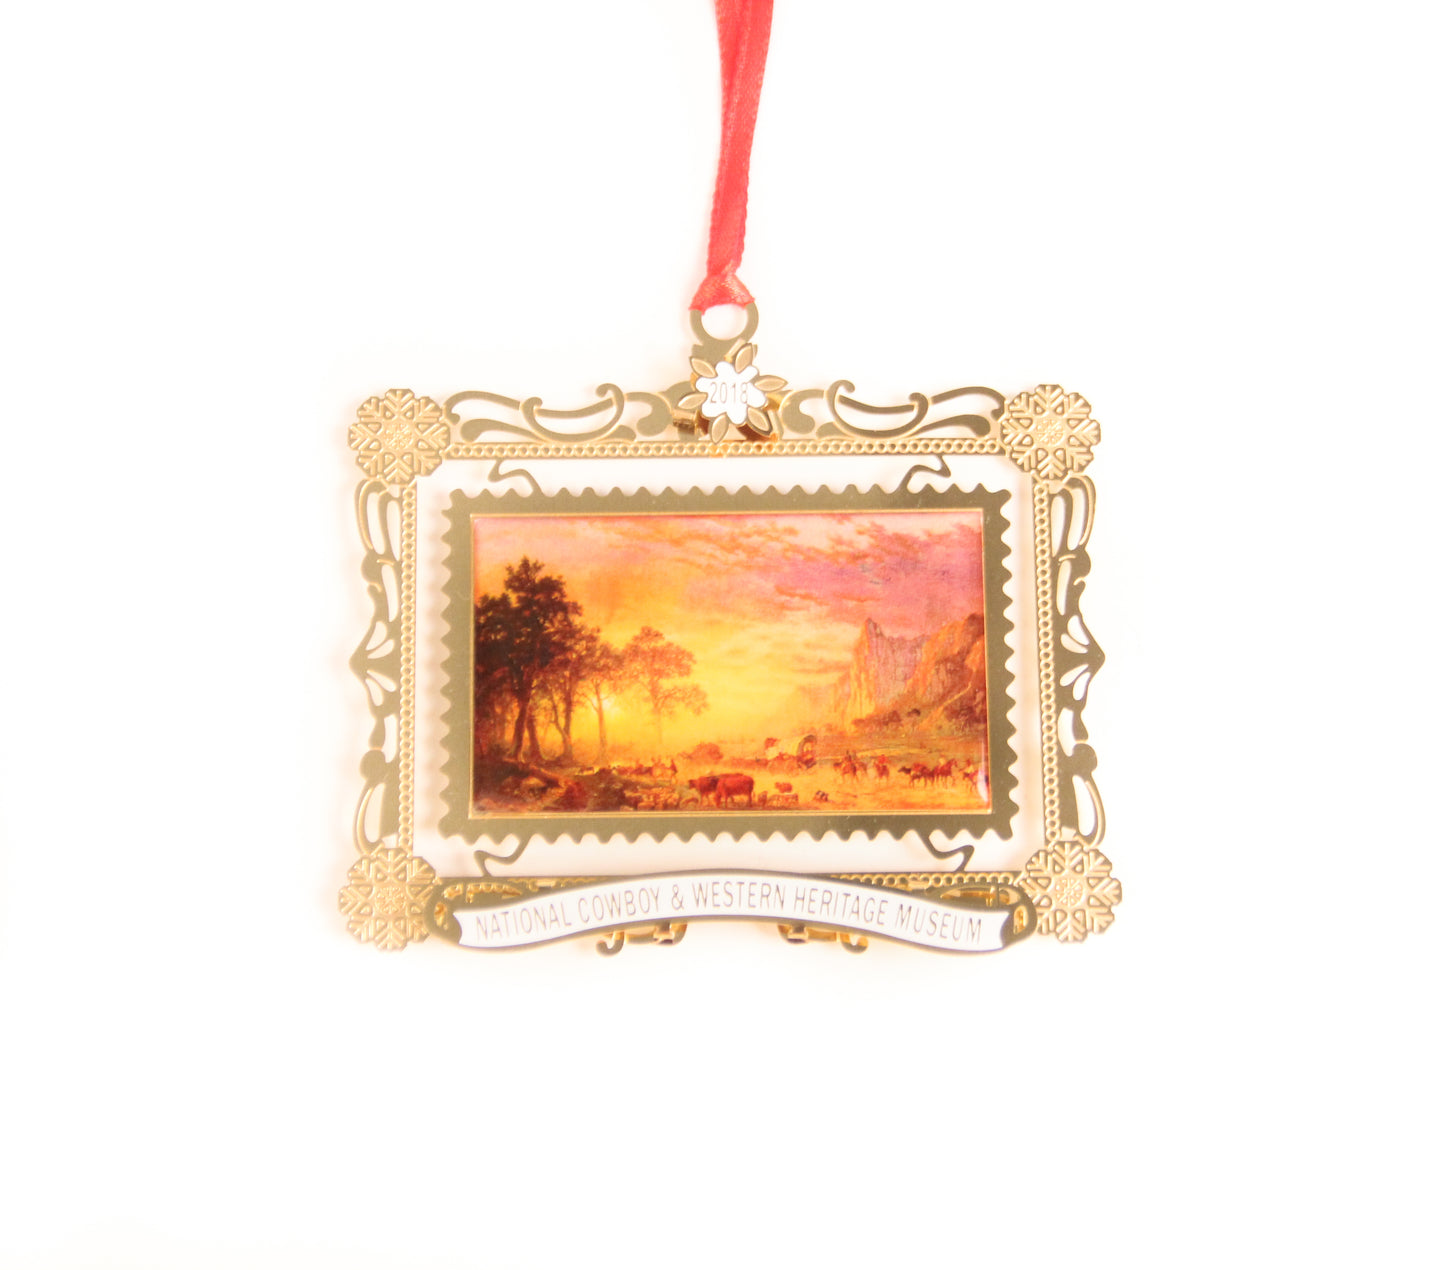 emigrants crossing the plains ornament 2018 annual christmas ornament from the national cowboy museum store albert bierstadt painting snowflakes